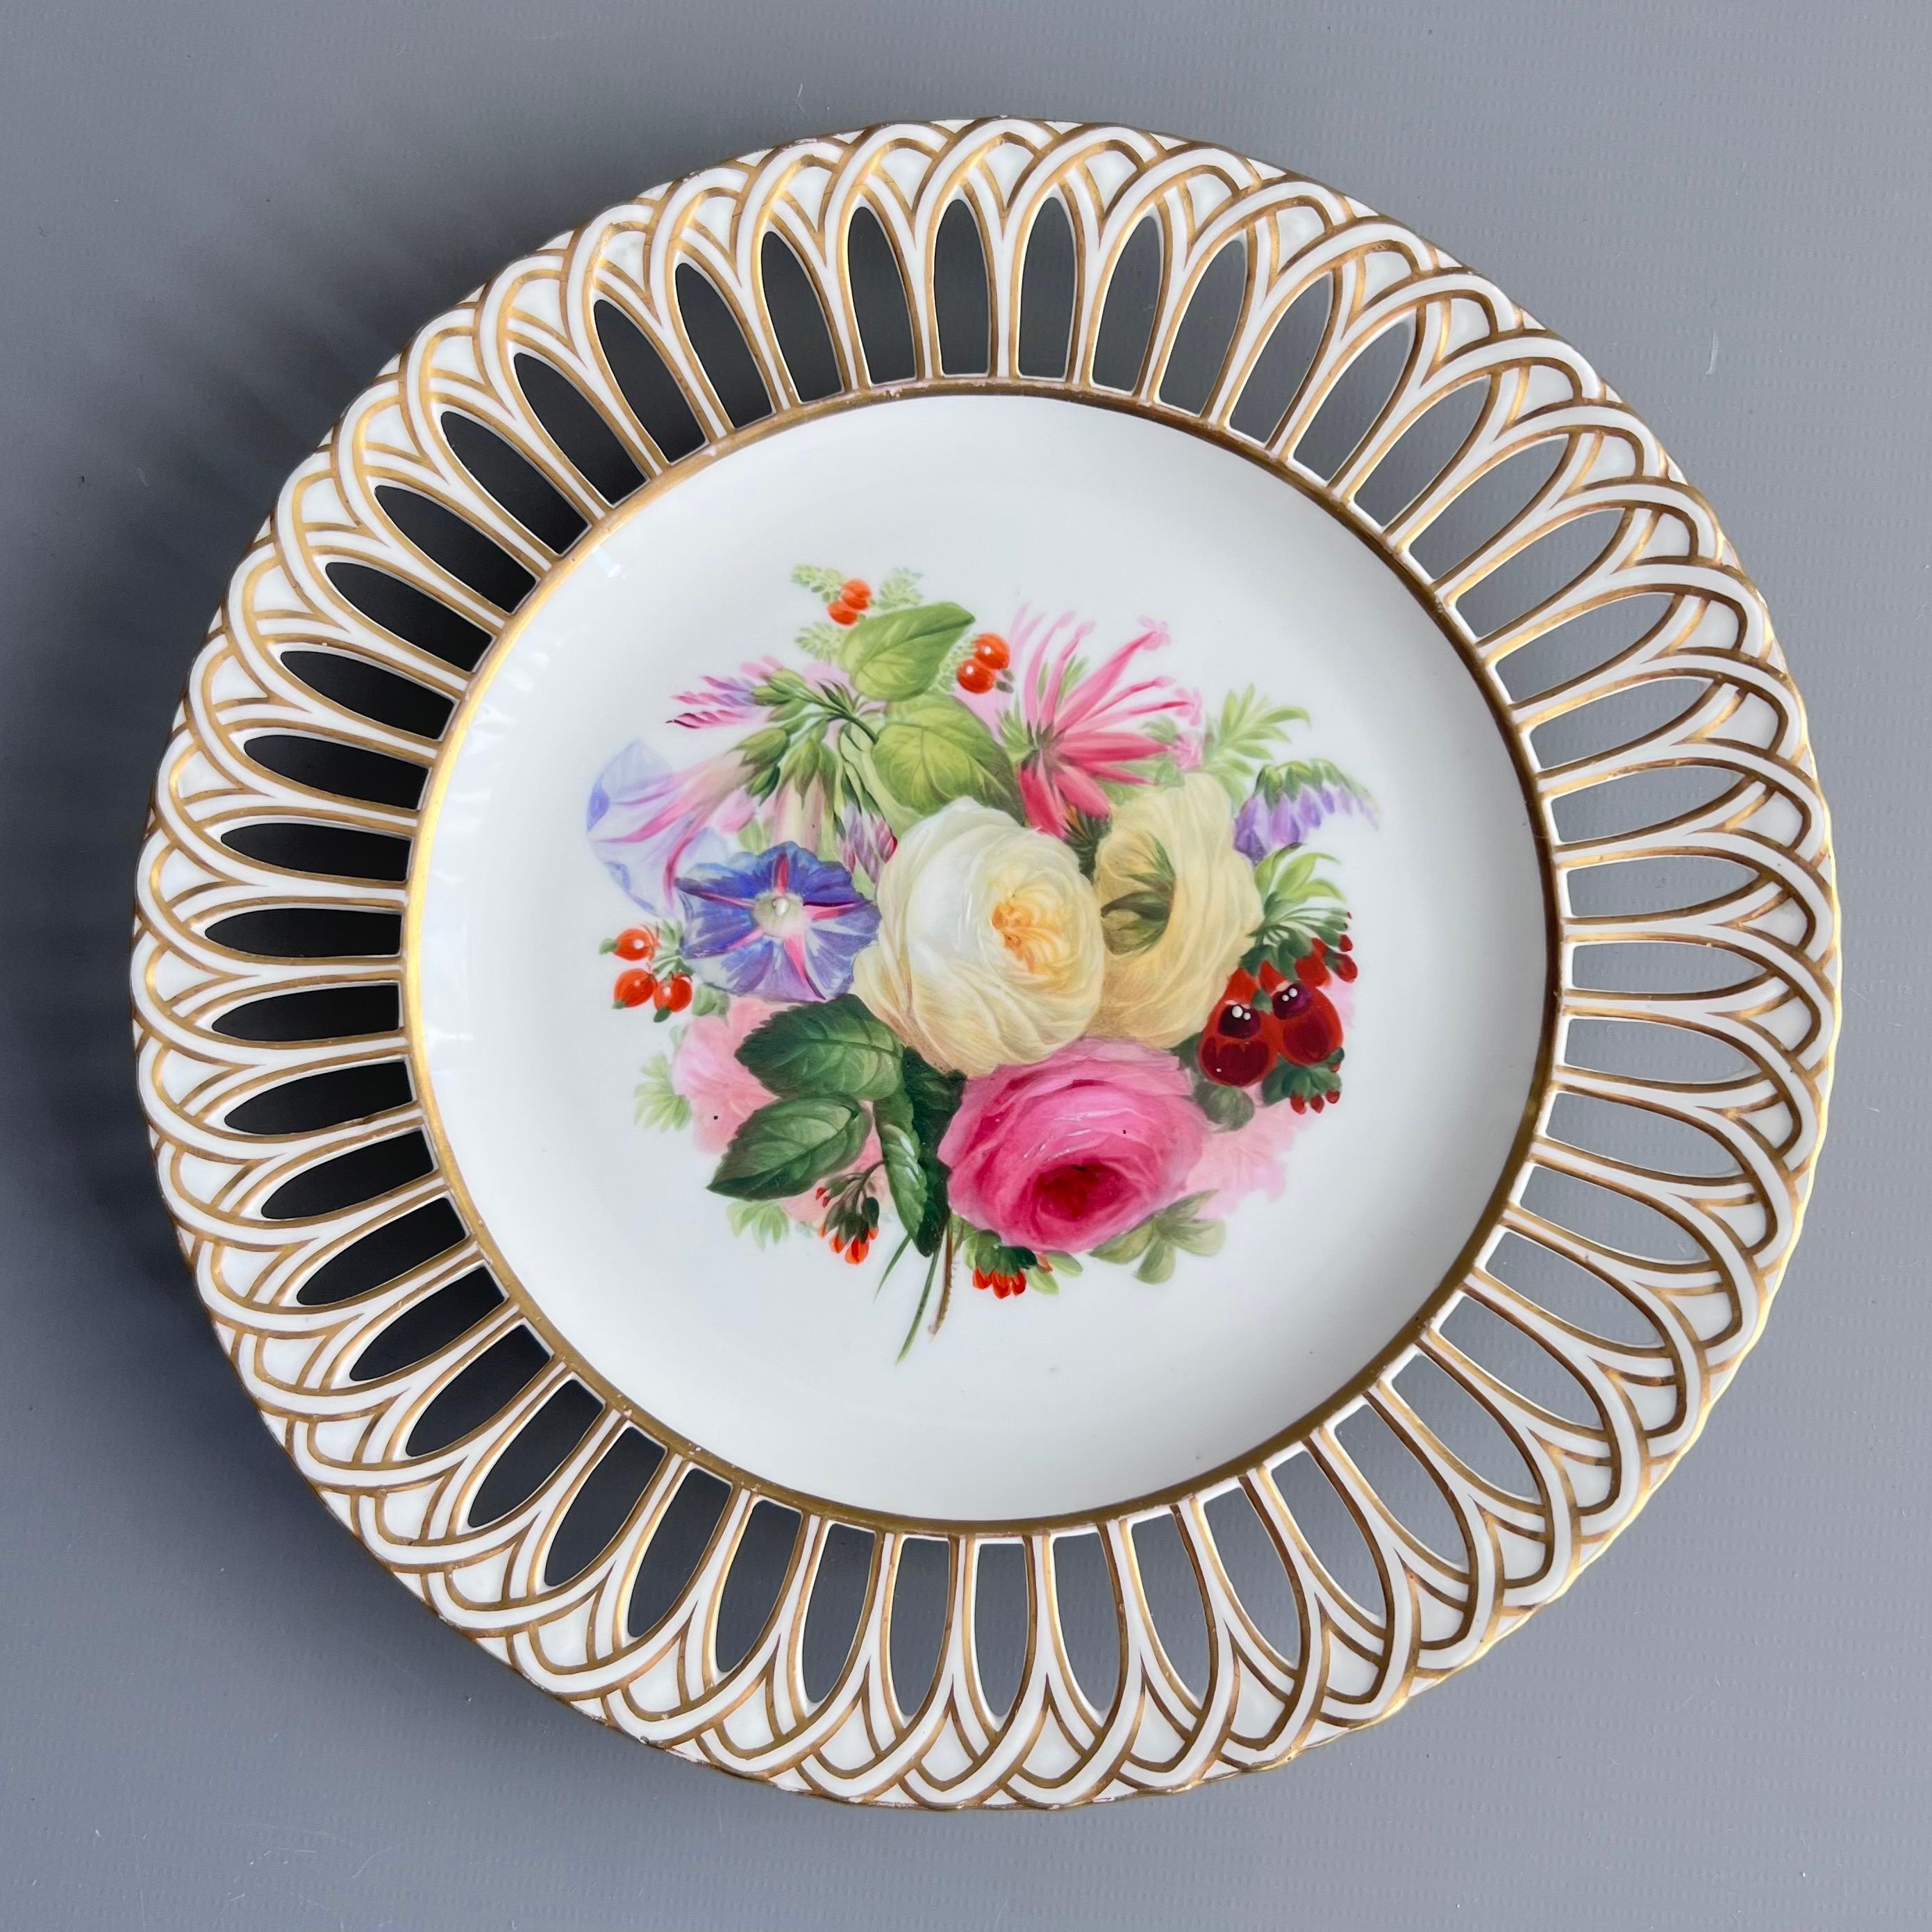 Copeland Set of 8 plates, Reticulated, Sublime Flowers by Greatbatch, 1848 For Sale 6